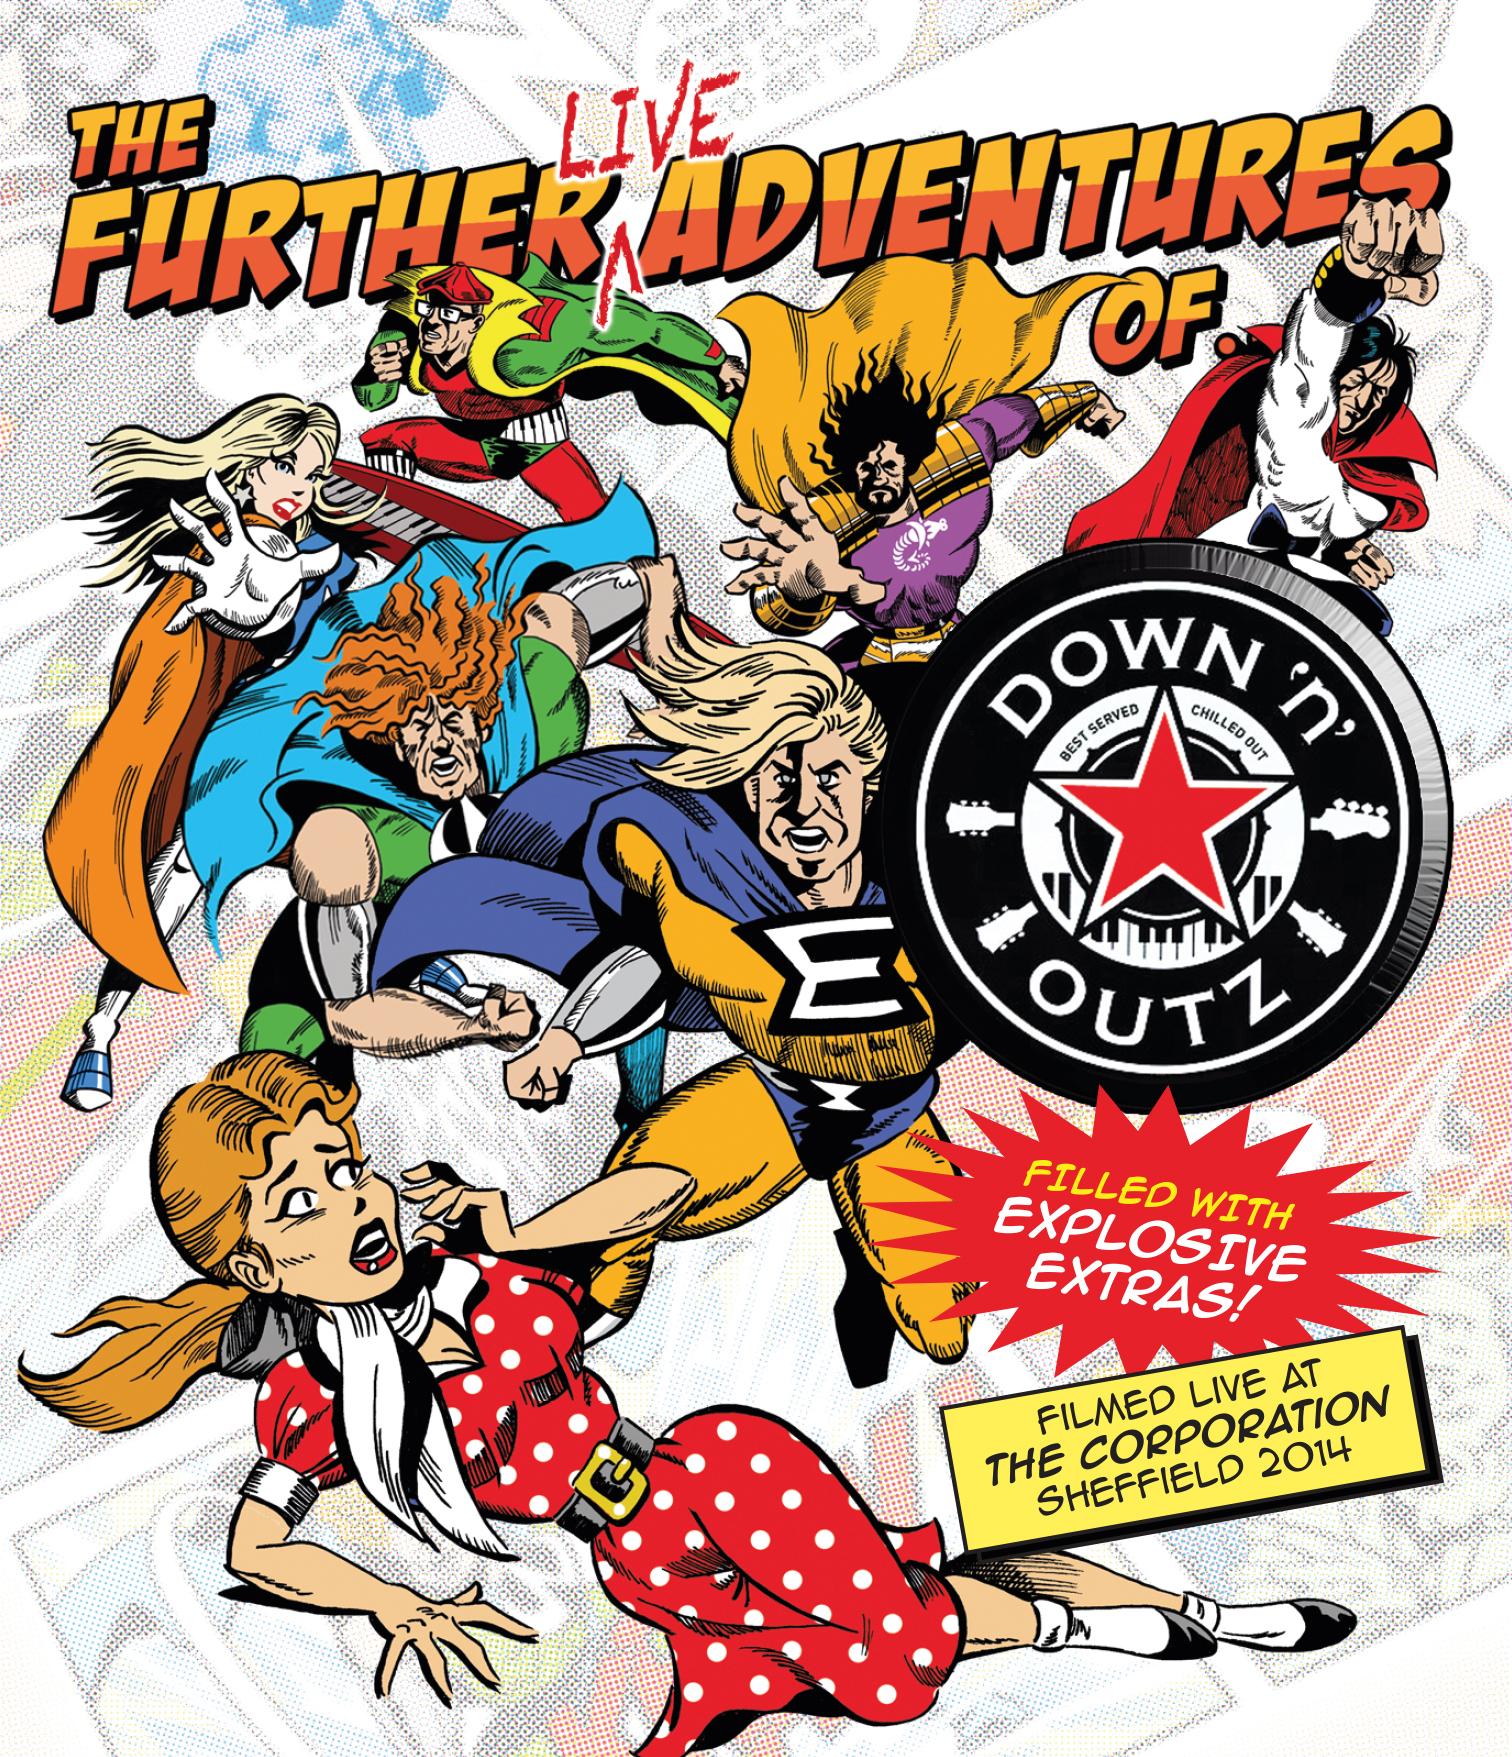 Down 'n' Outz - The Further Live Adventures Of…